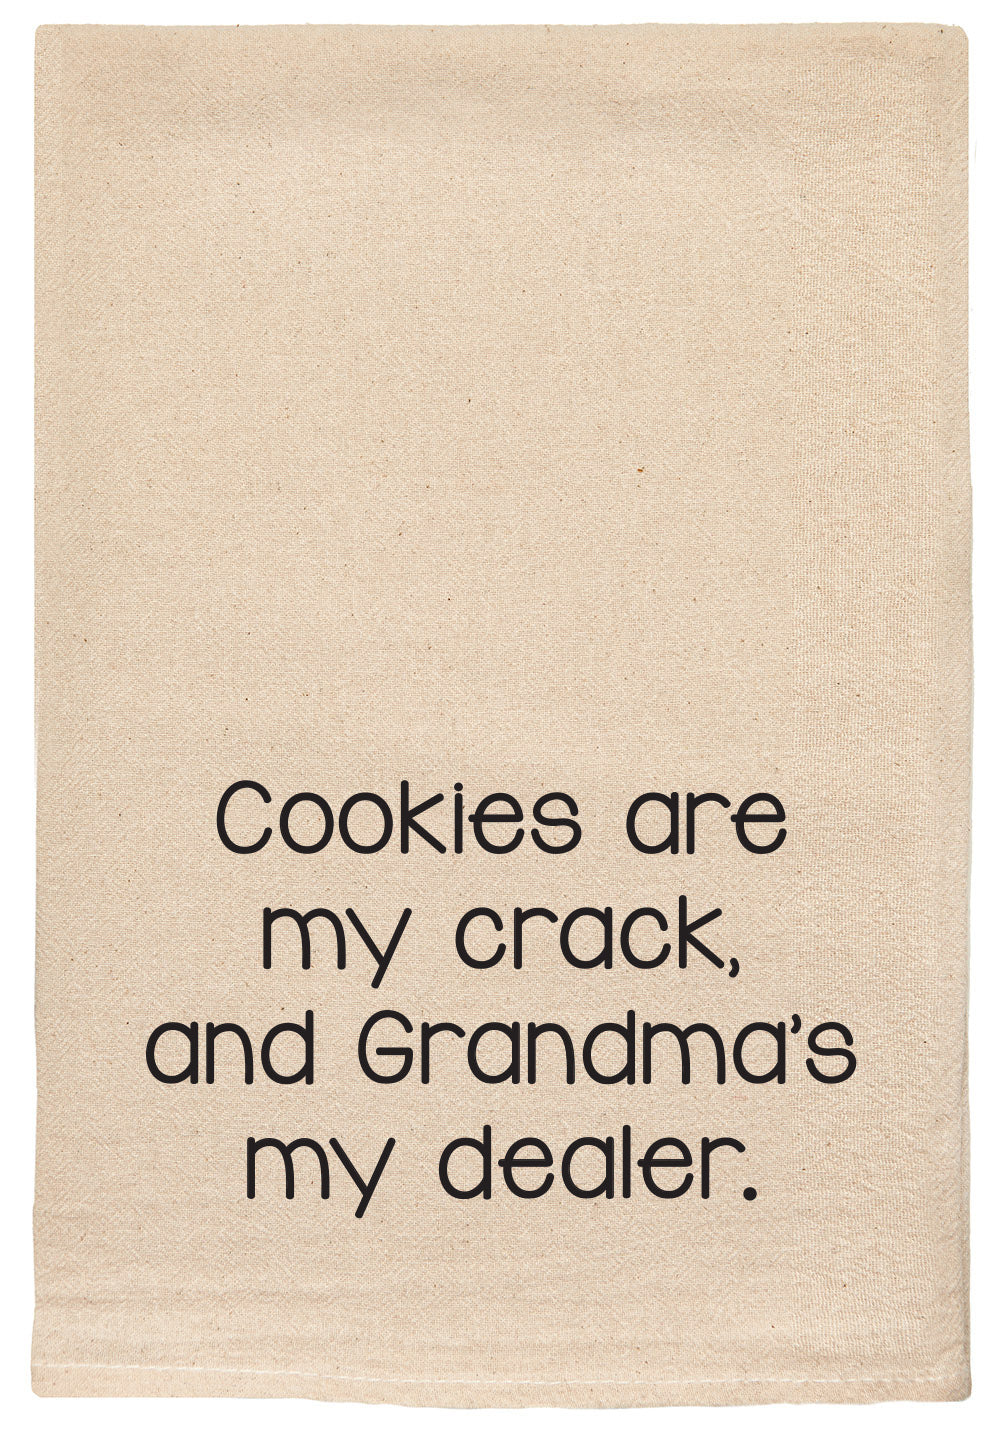 Cookies are my crack, and grandma's my dealer.